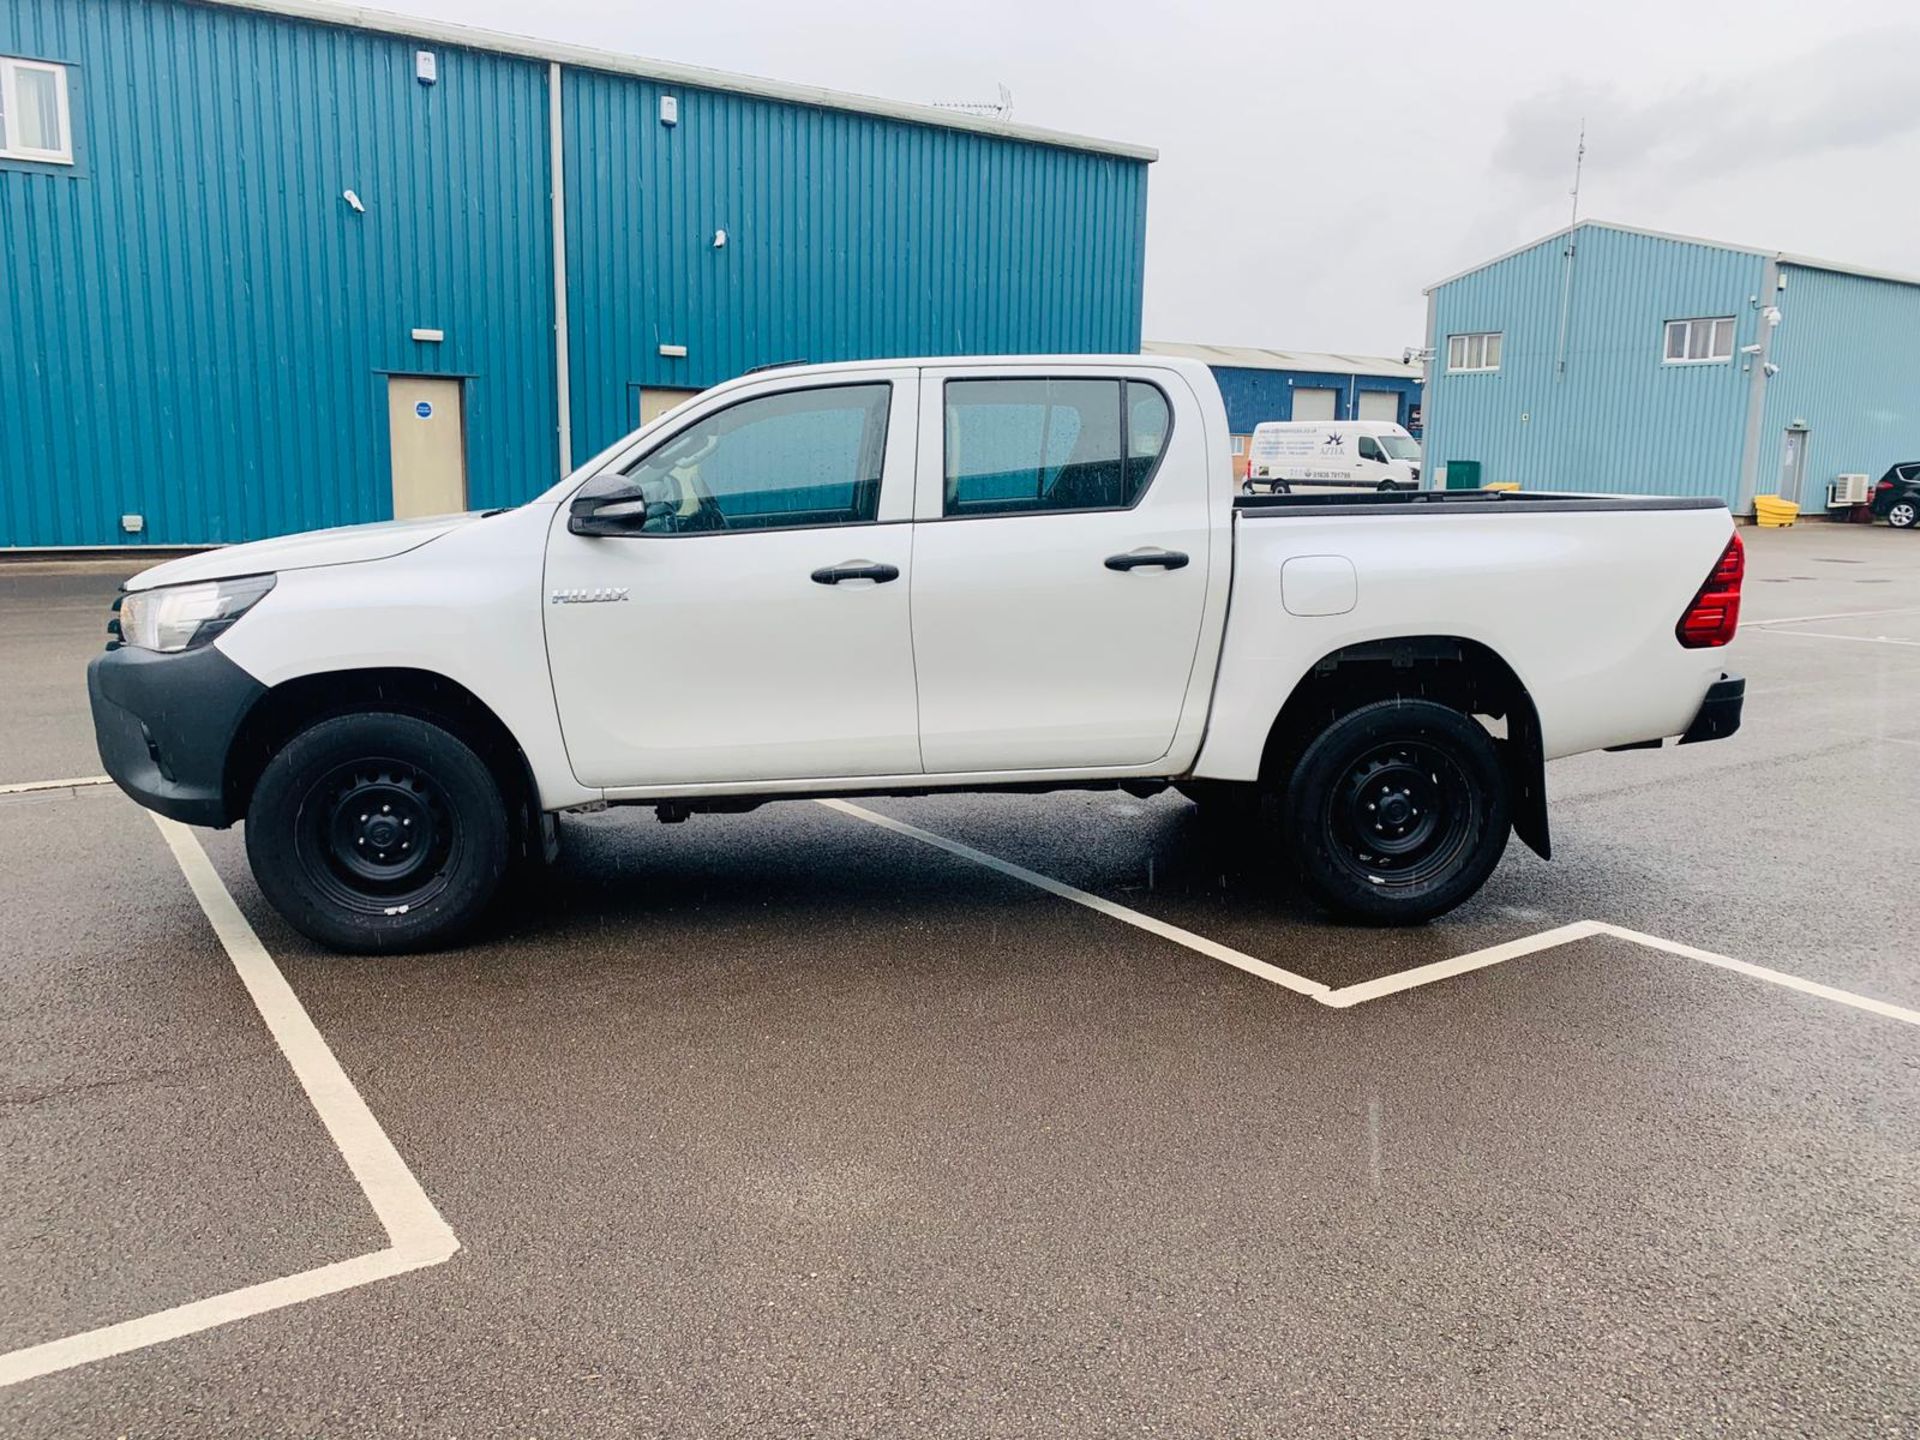 Toyota Hilux 2.4 D-4D Active 4WD Double Cab Pick Up - 2017 17 Reg - Air Con - Euro 6b - Tow Pack - Image 10 of 31